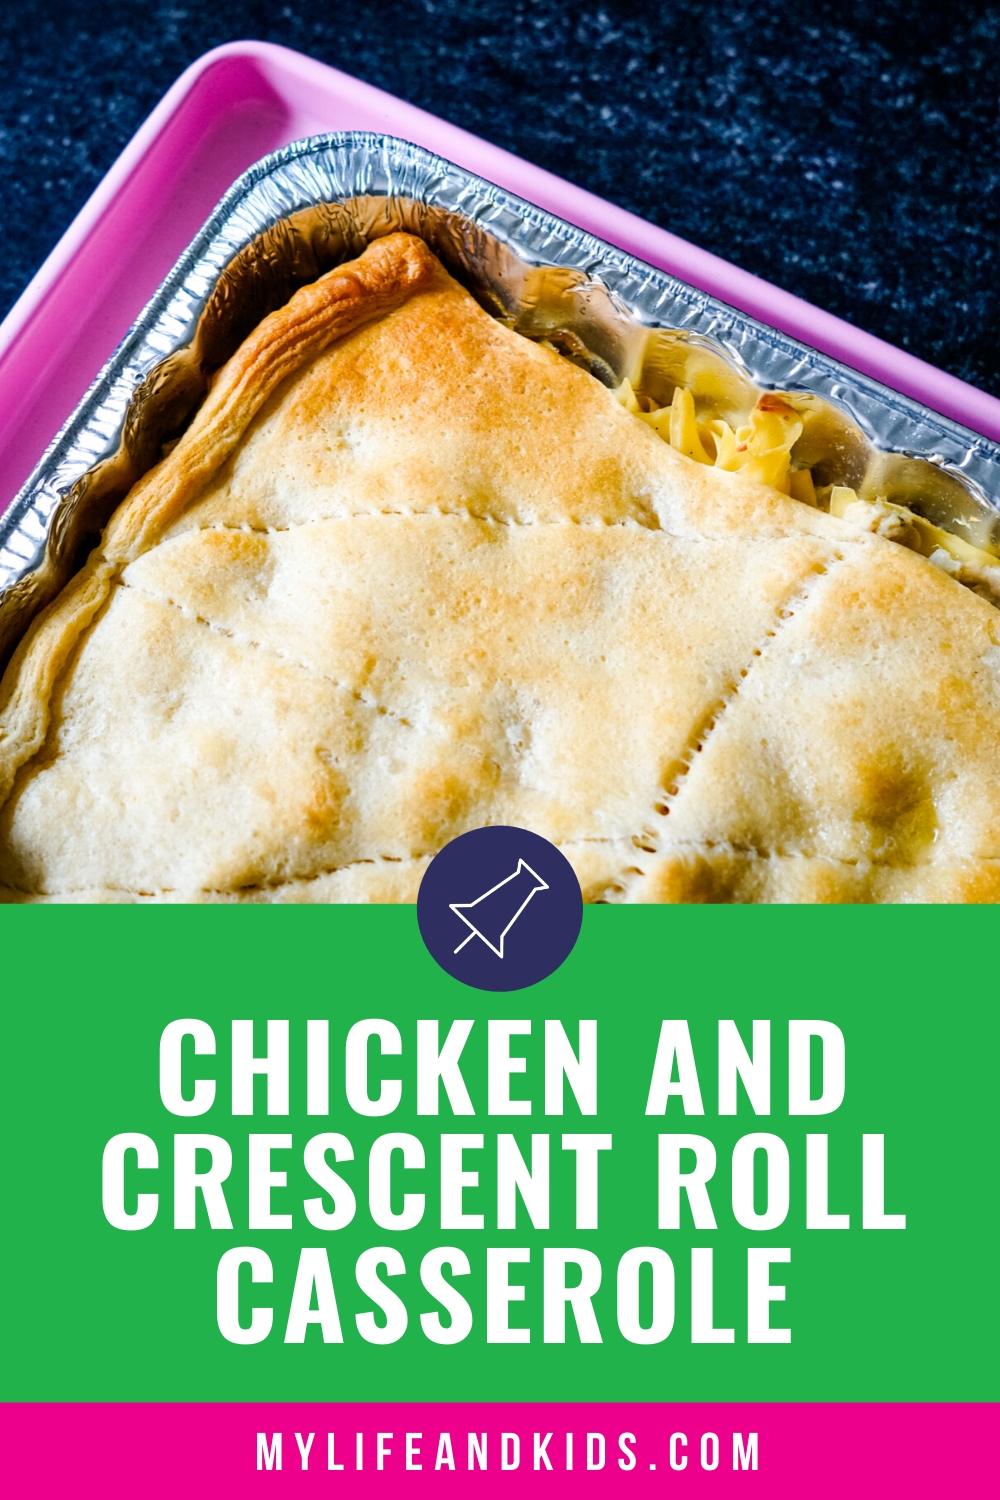 Freezer Chicken and Crescent Roll Casserole - My Life and Kids